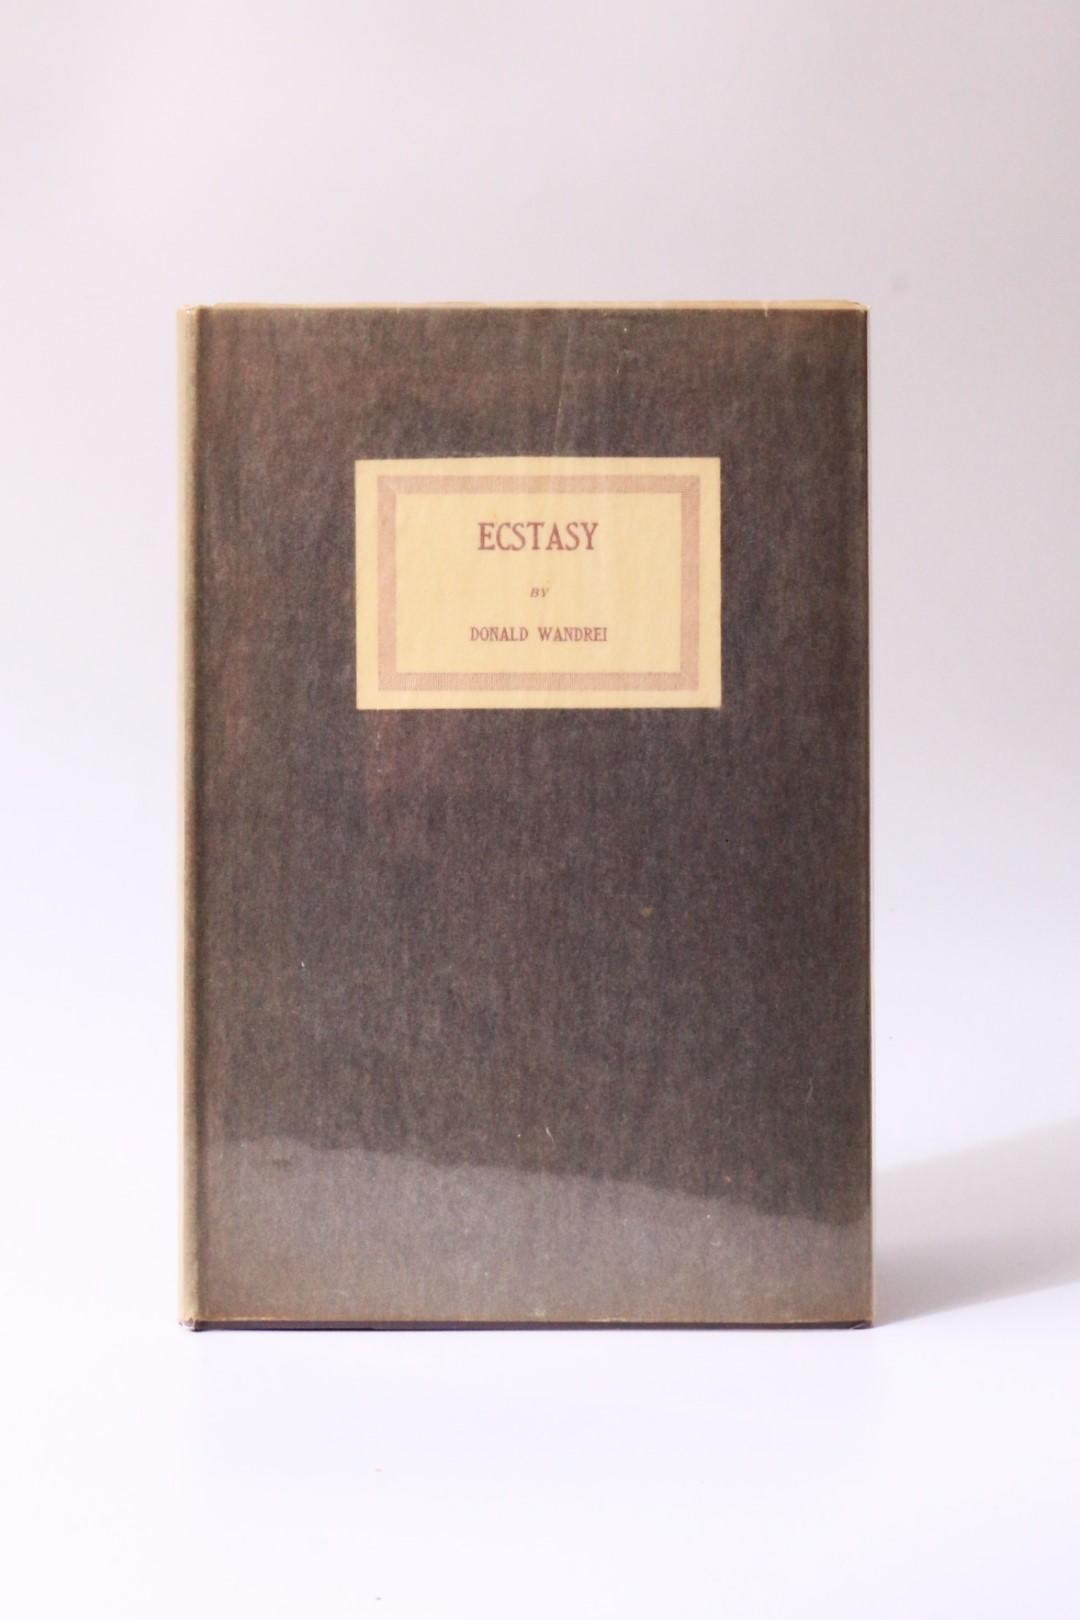 Donald Wandrei - Ecstasy & Other Poems - The Recluse Press, 1928, Limited Edition.